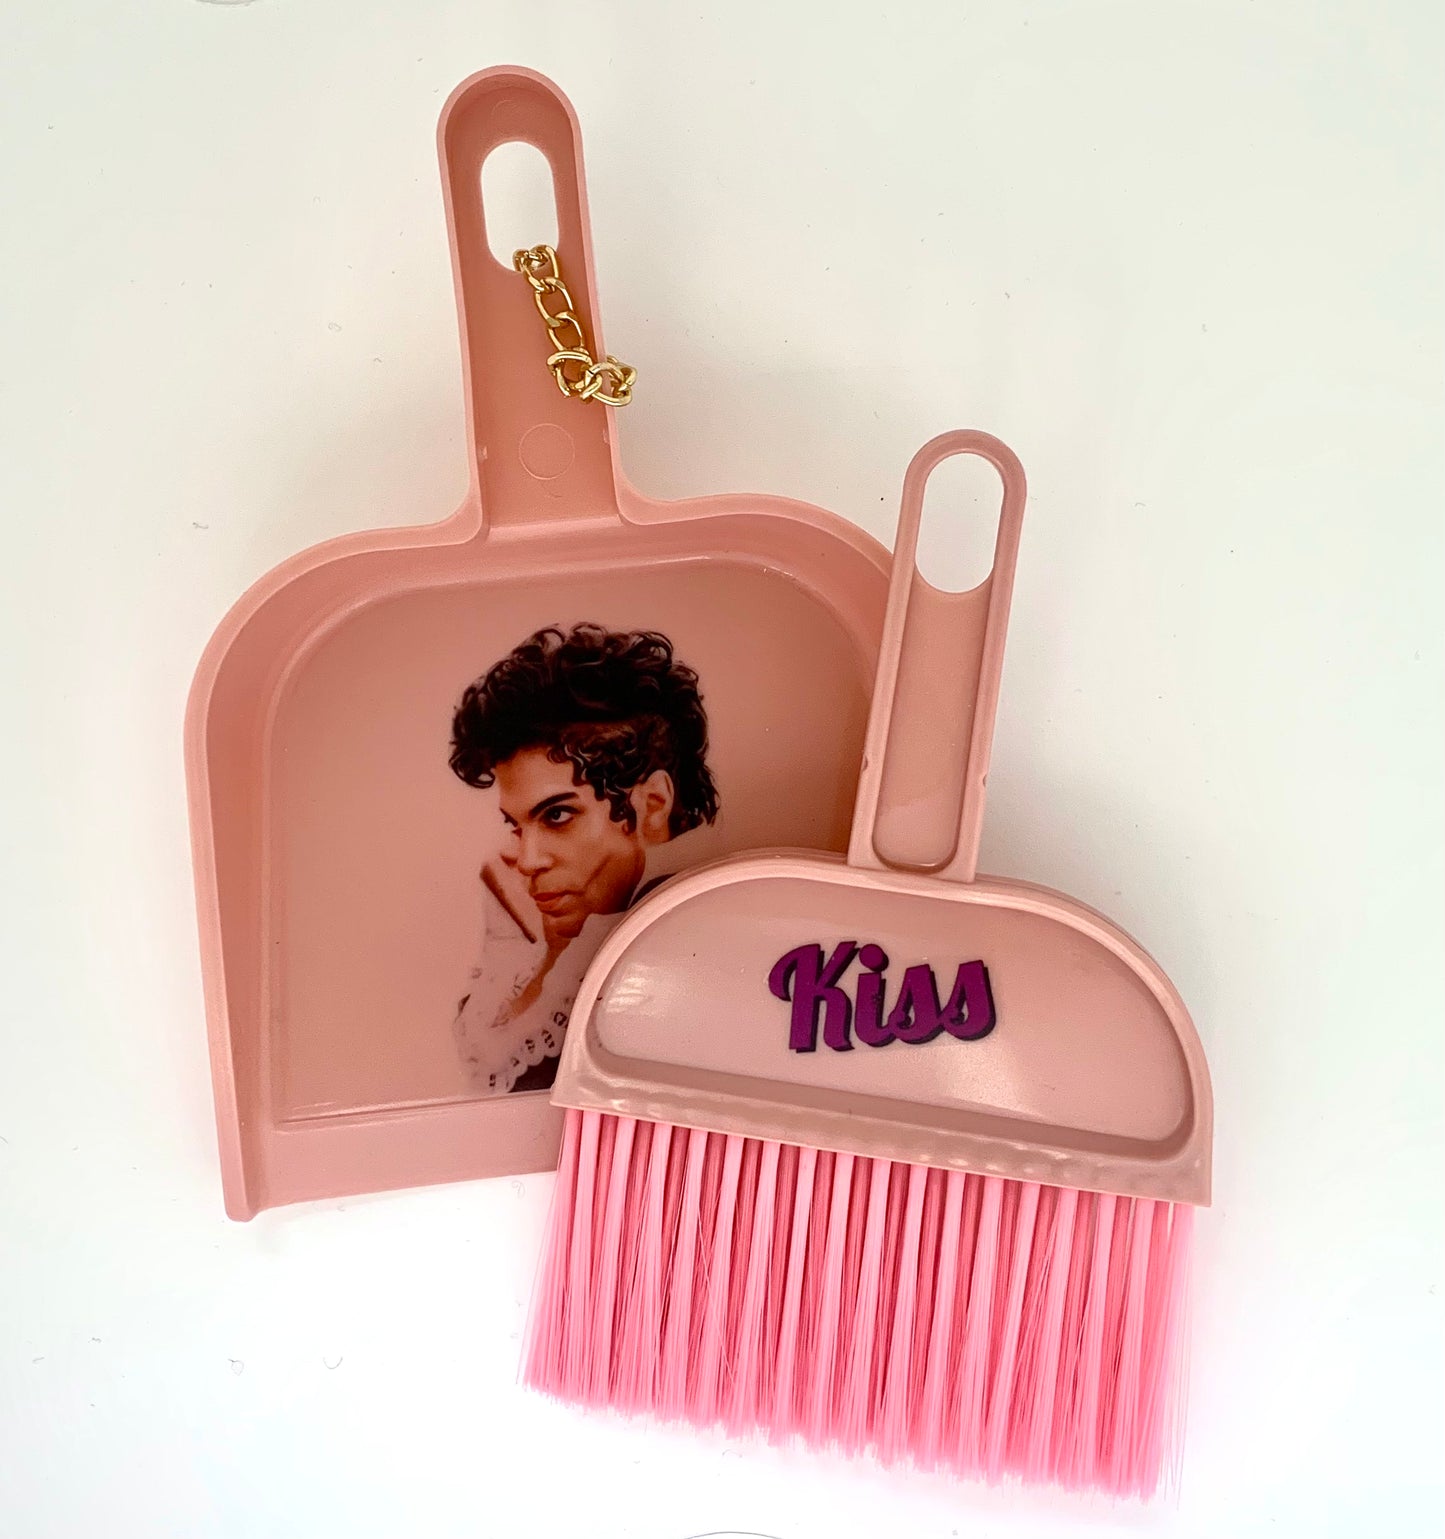 Prince themed dustpan and brush